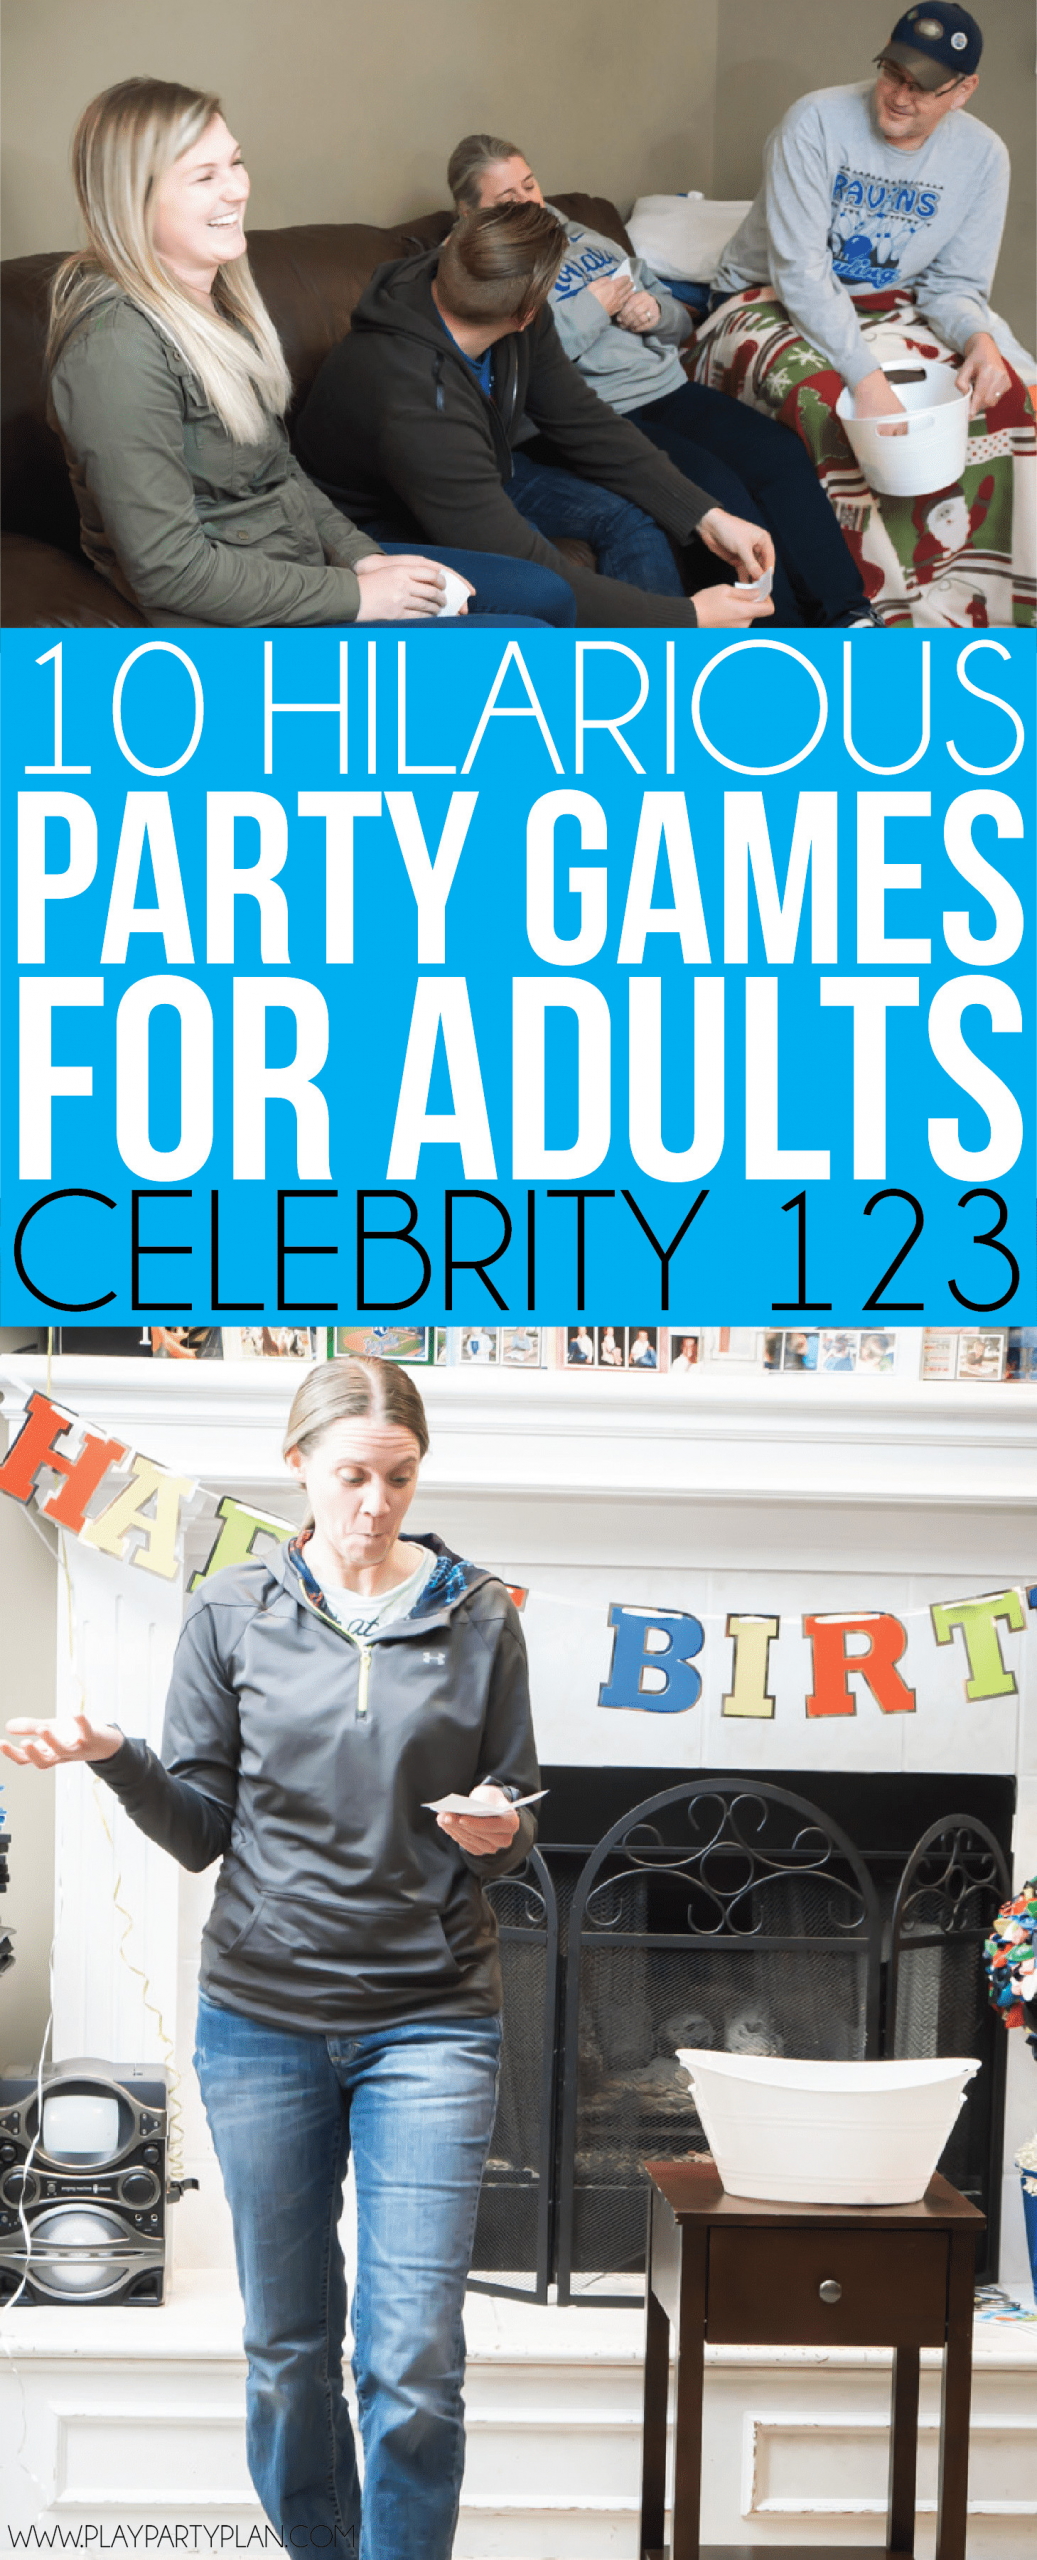 Work Party Ideas For Adults
 19 Hilarious Party Games for Adults Play Party Plan